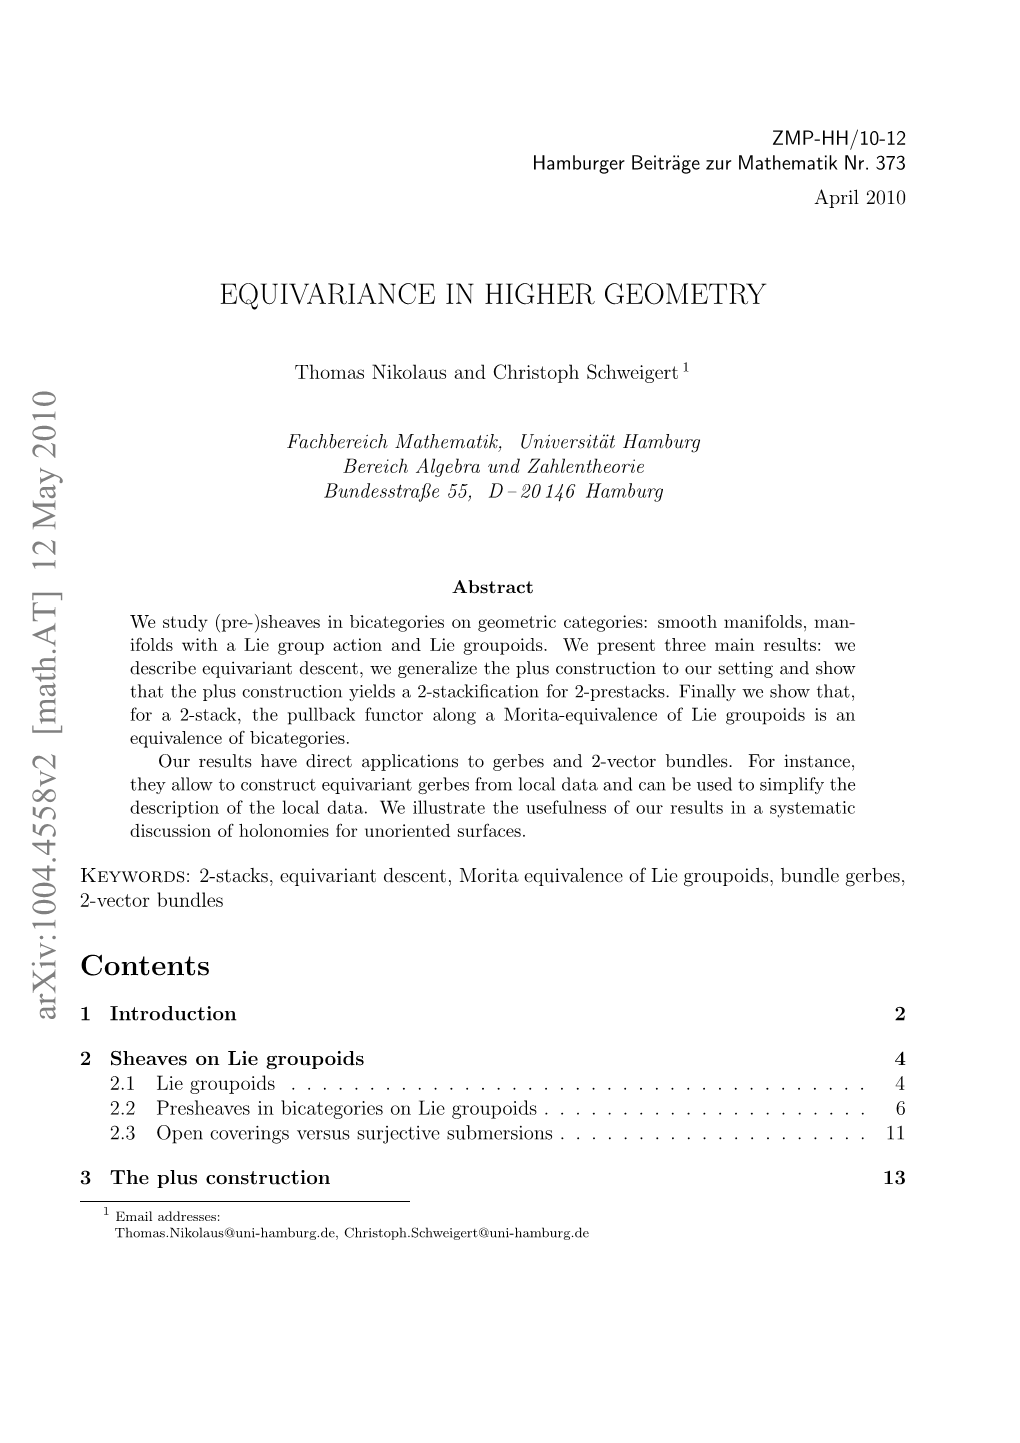 Equivariance in Higher Geometry